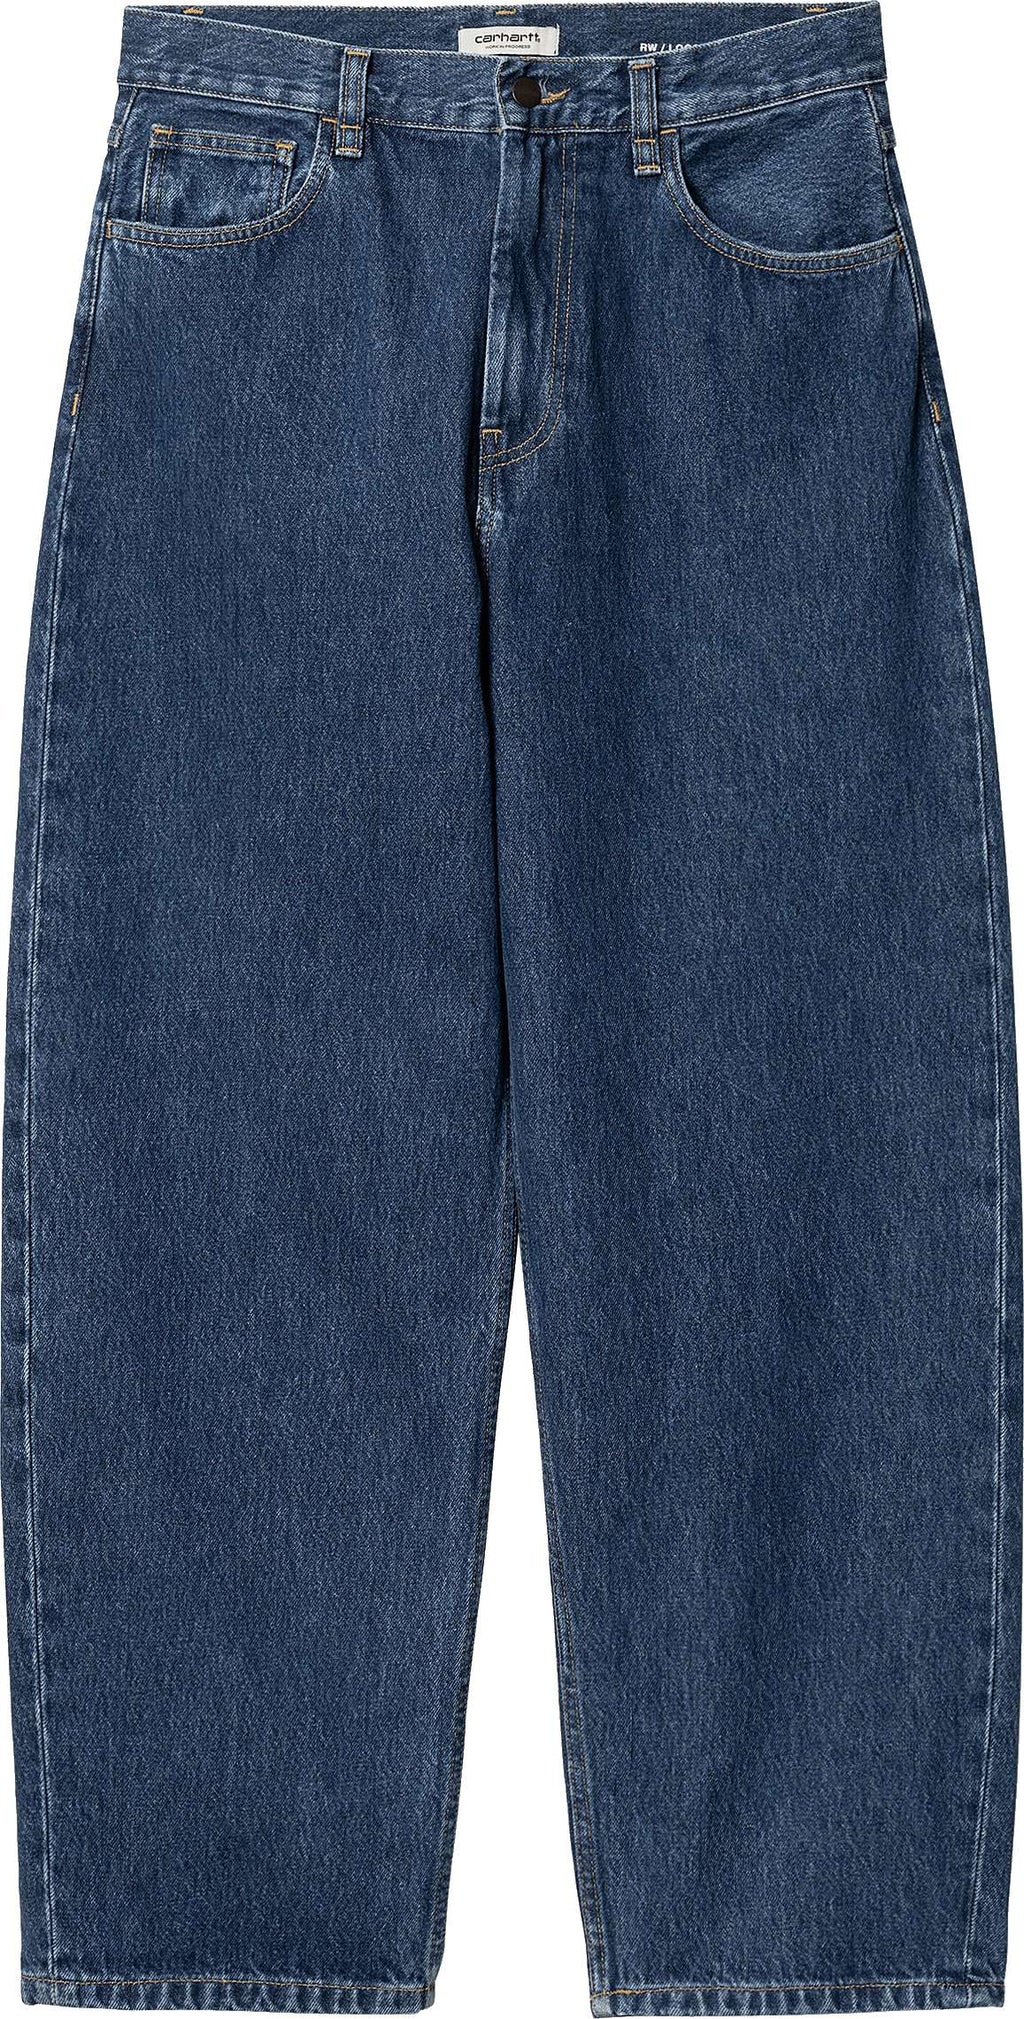  Carhartt Wip Jeans W Brandon Pant Blue Stone Washed Donna - 1